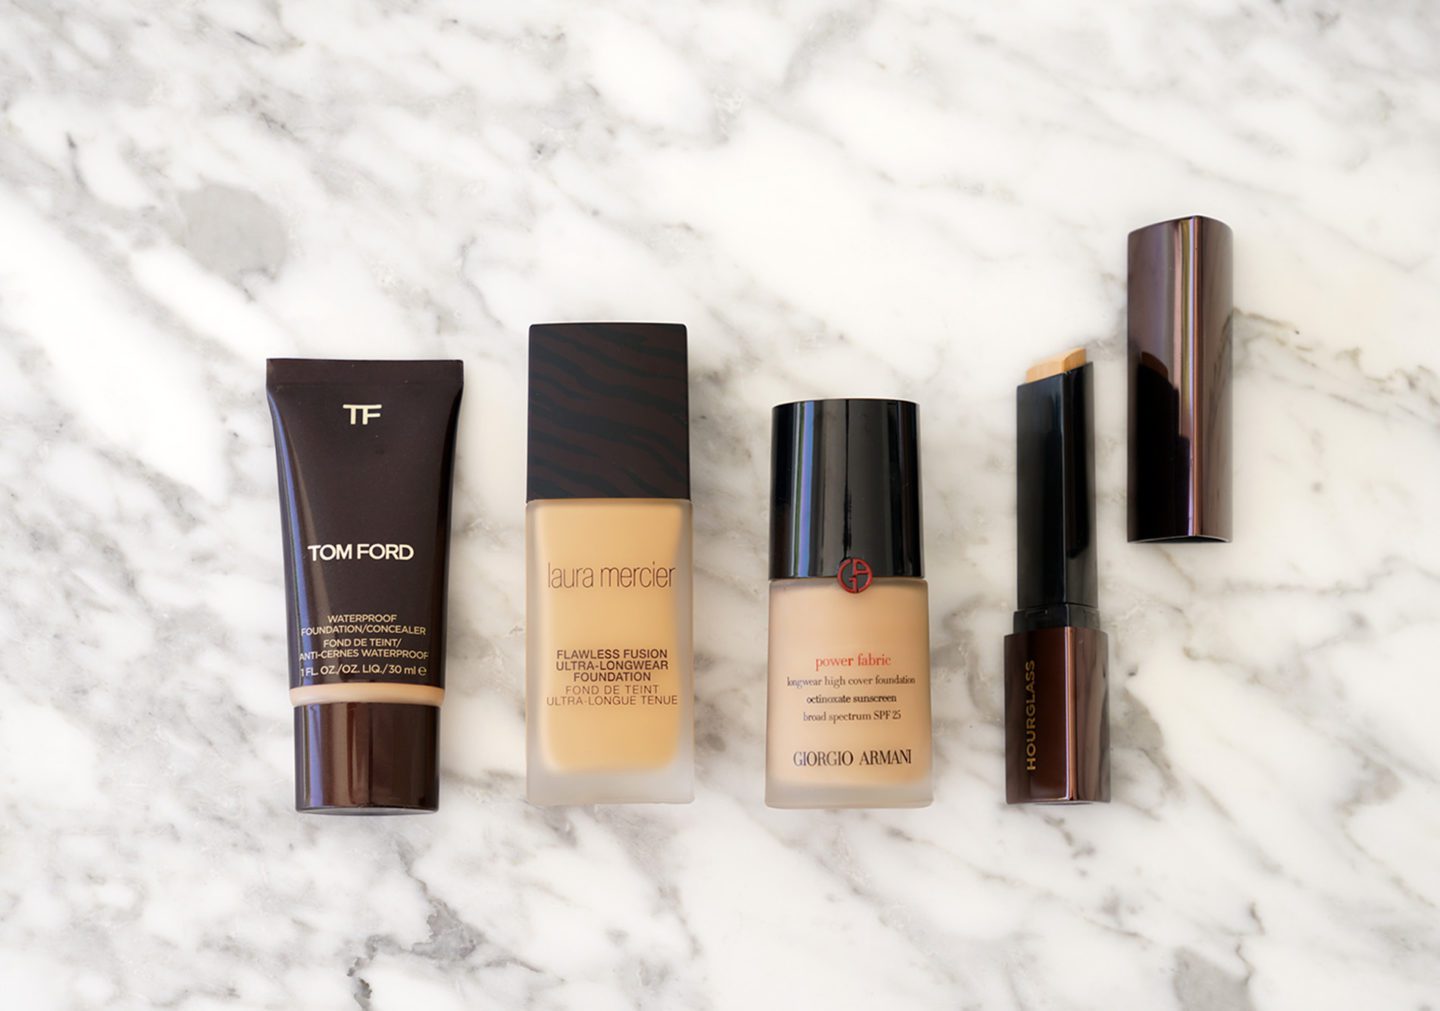 Medium to Full Coverage Foundations | The Beauty Look Book